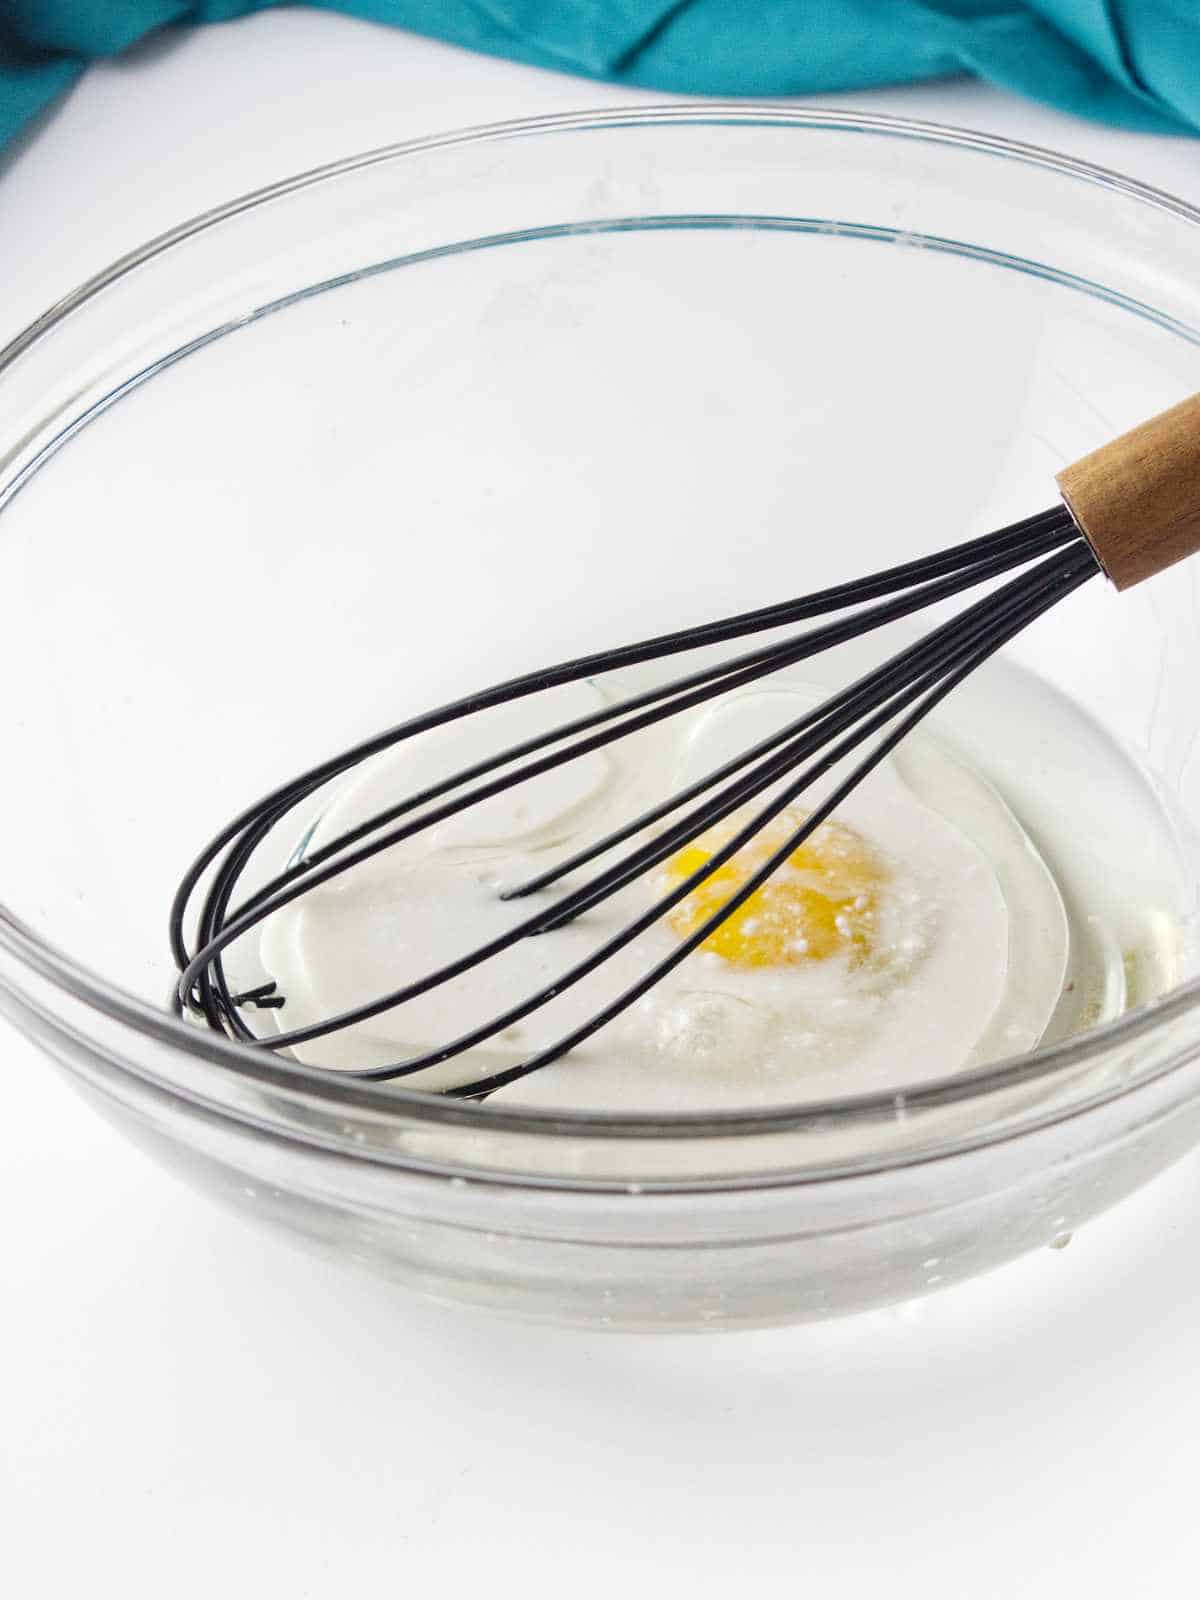 oil and egg in a bowl with a whisk.